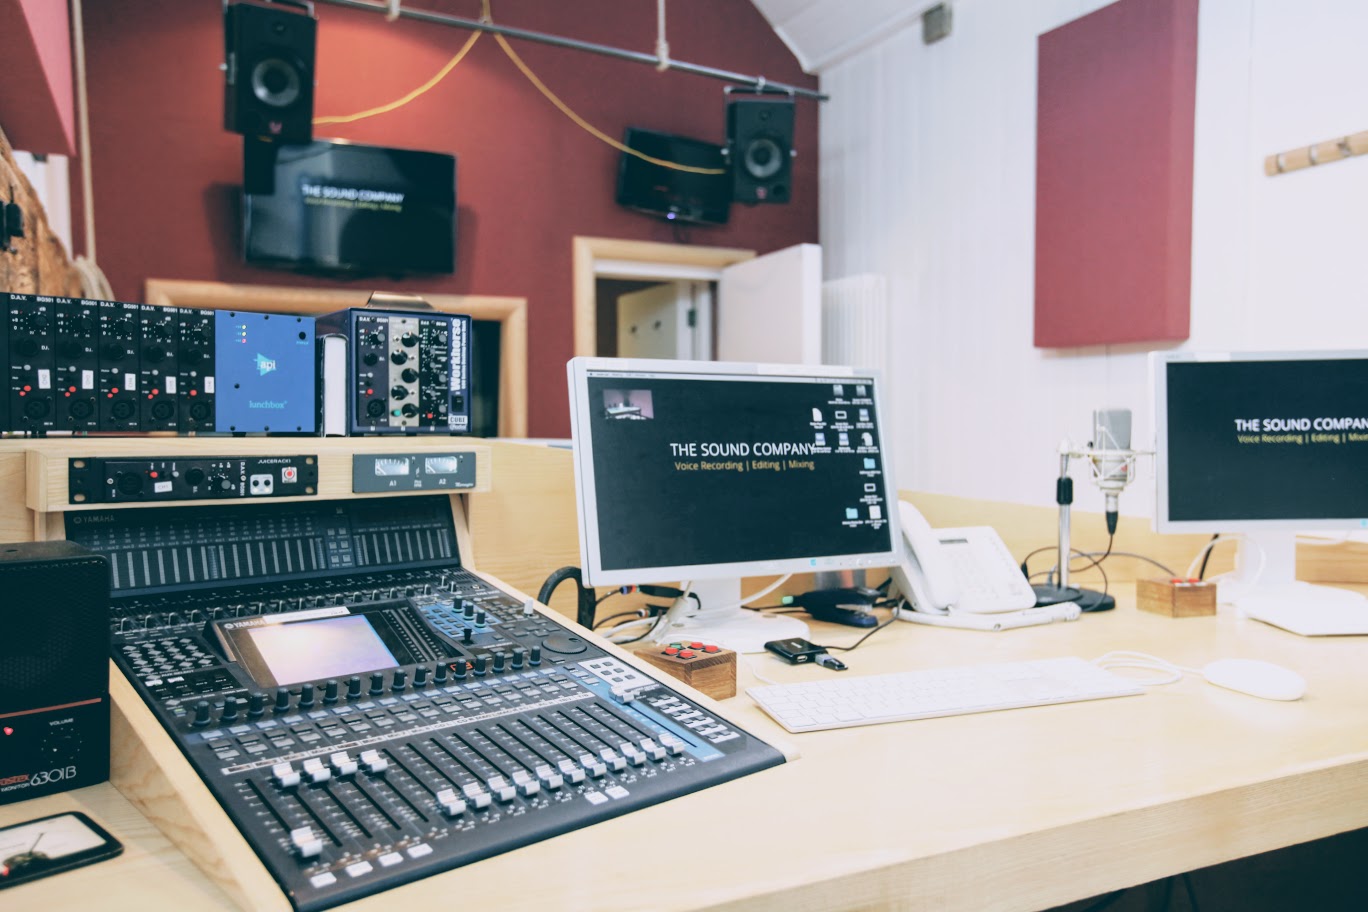 The Sound Company Studios | Studio 5 | Central London Podcast Studio with ISDN, Source-Connect, TBU Phone Patches